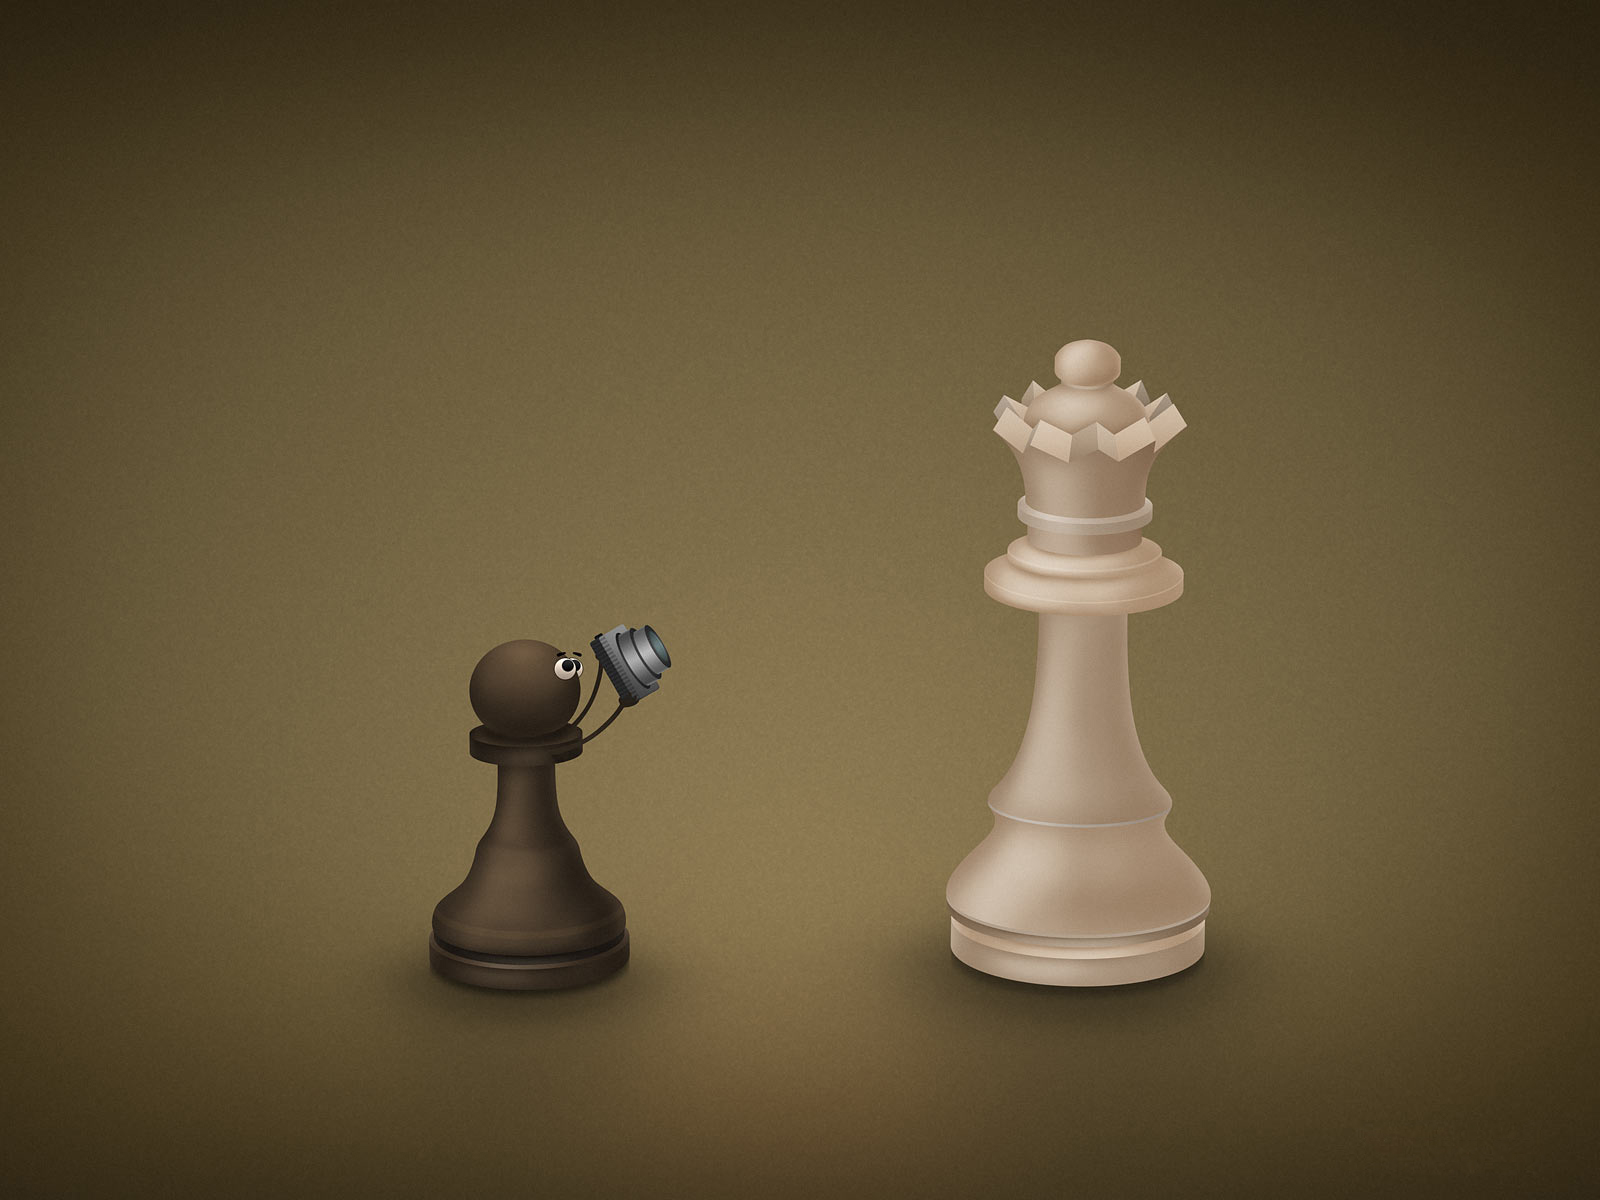 Download wallpaper 3840x2400 chess, pieces, board, game, games 4k ultra hd  16:10 hd background